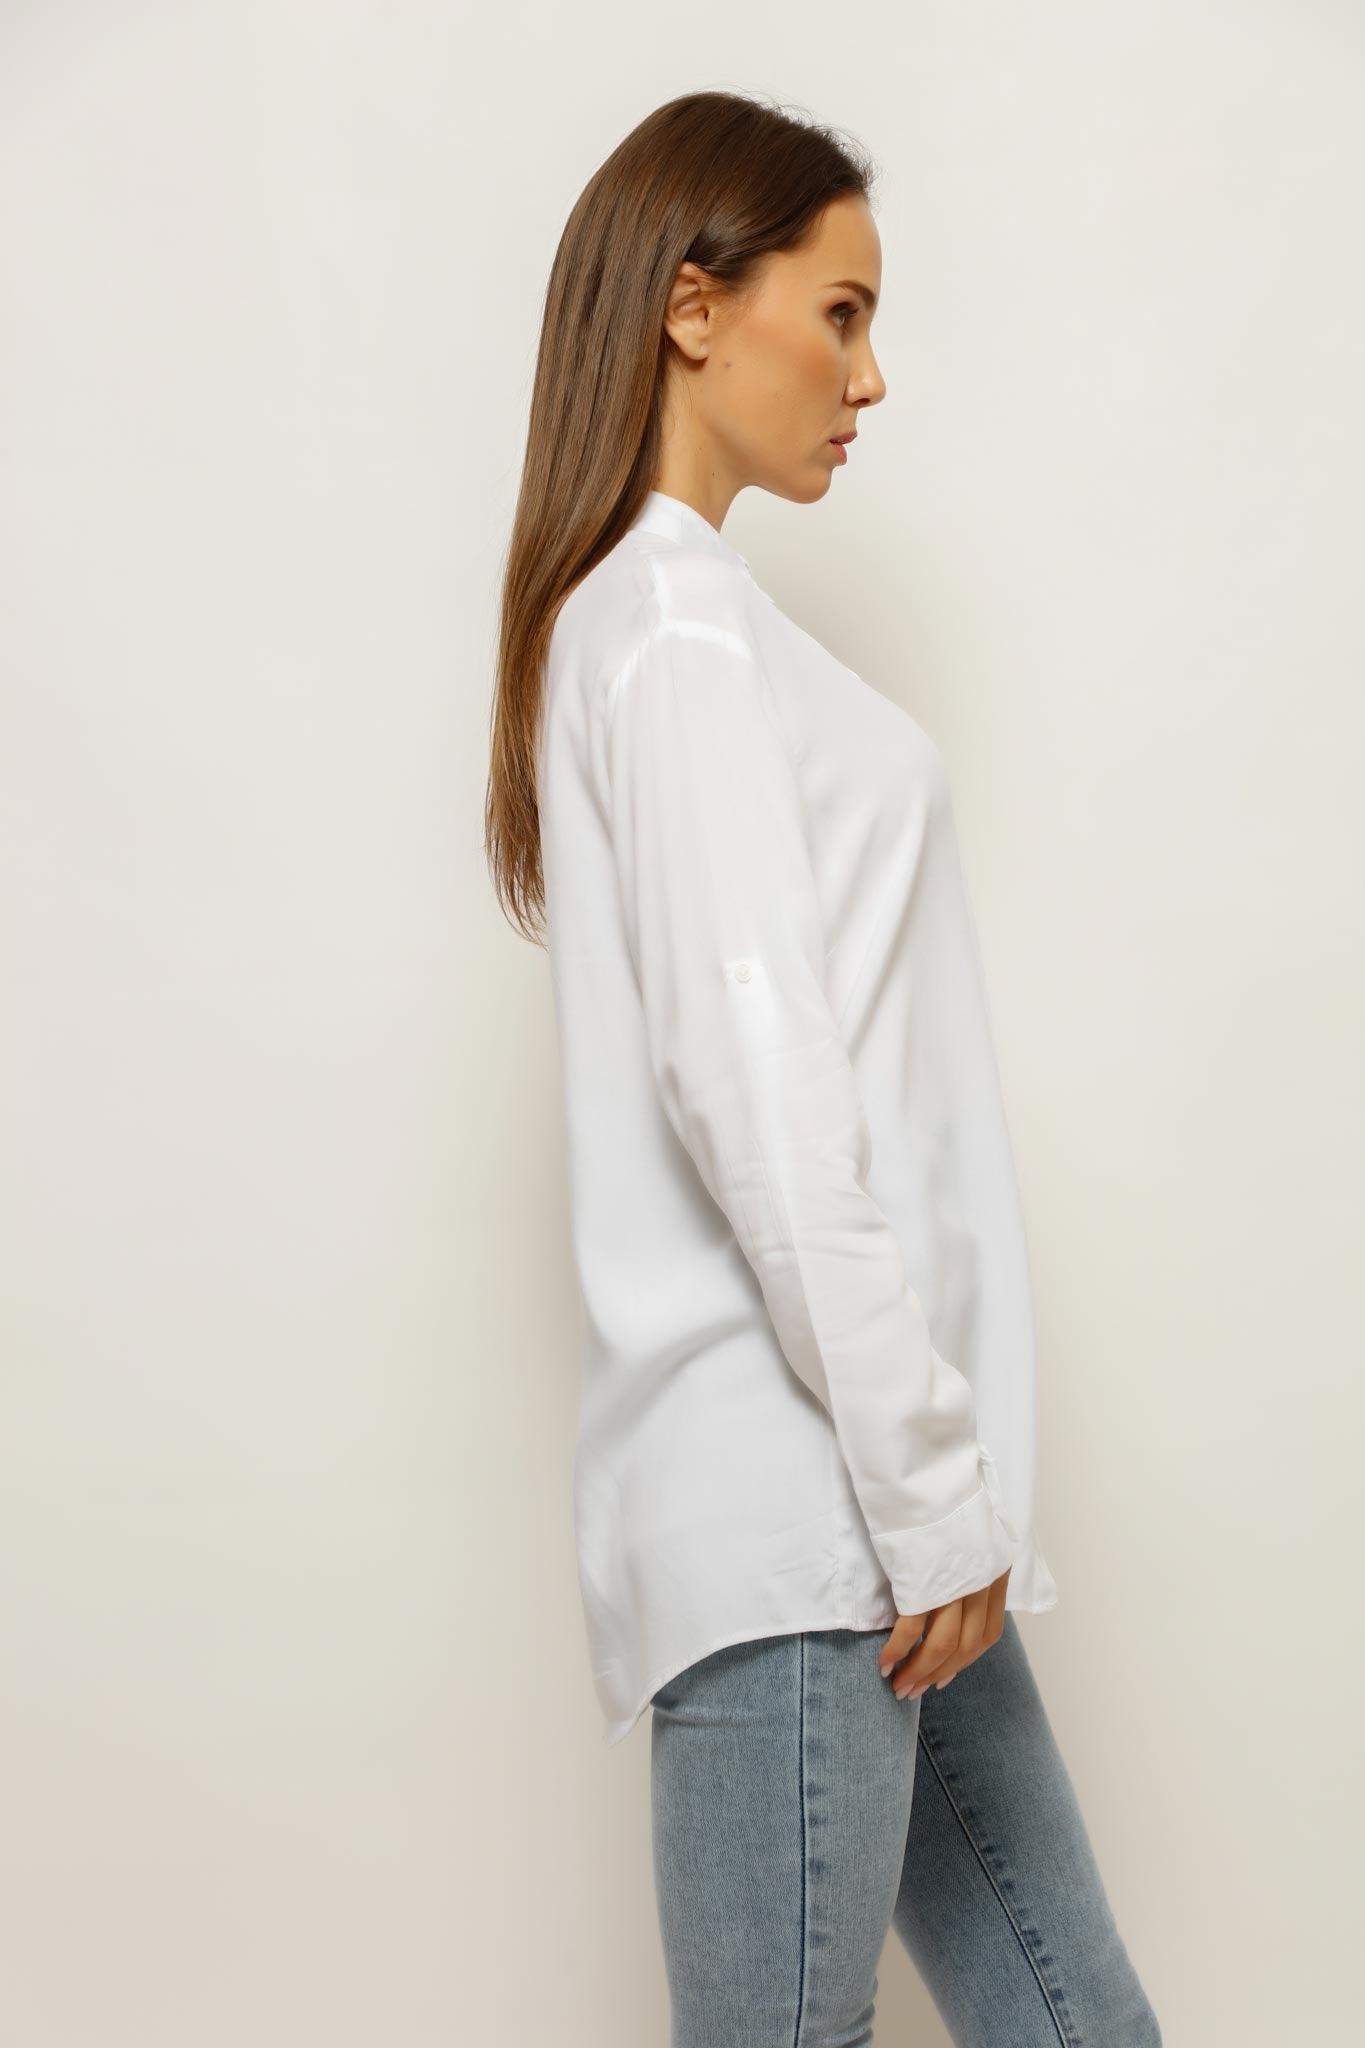 WOMEN'S COLORED CASUAL SHIRT, SHIRT, CORADO, be unique, button, collared, comfy, corado fashion, coradomoda, FASHION, label, lifestyle, longsleeve, made in turkey, new collection, plain, shirt, statement, style, top, white, women, coradomoda, coradomoda.com